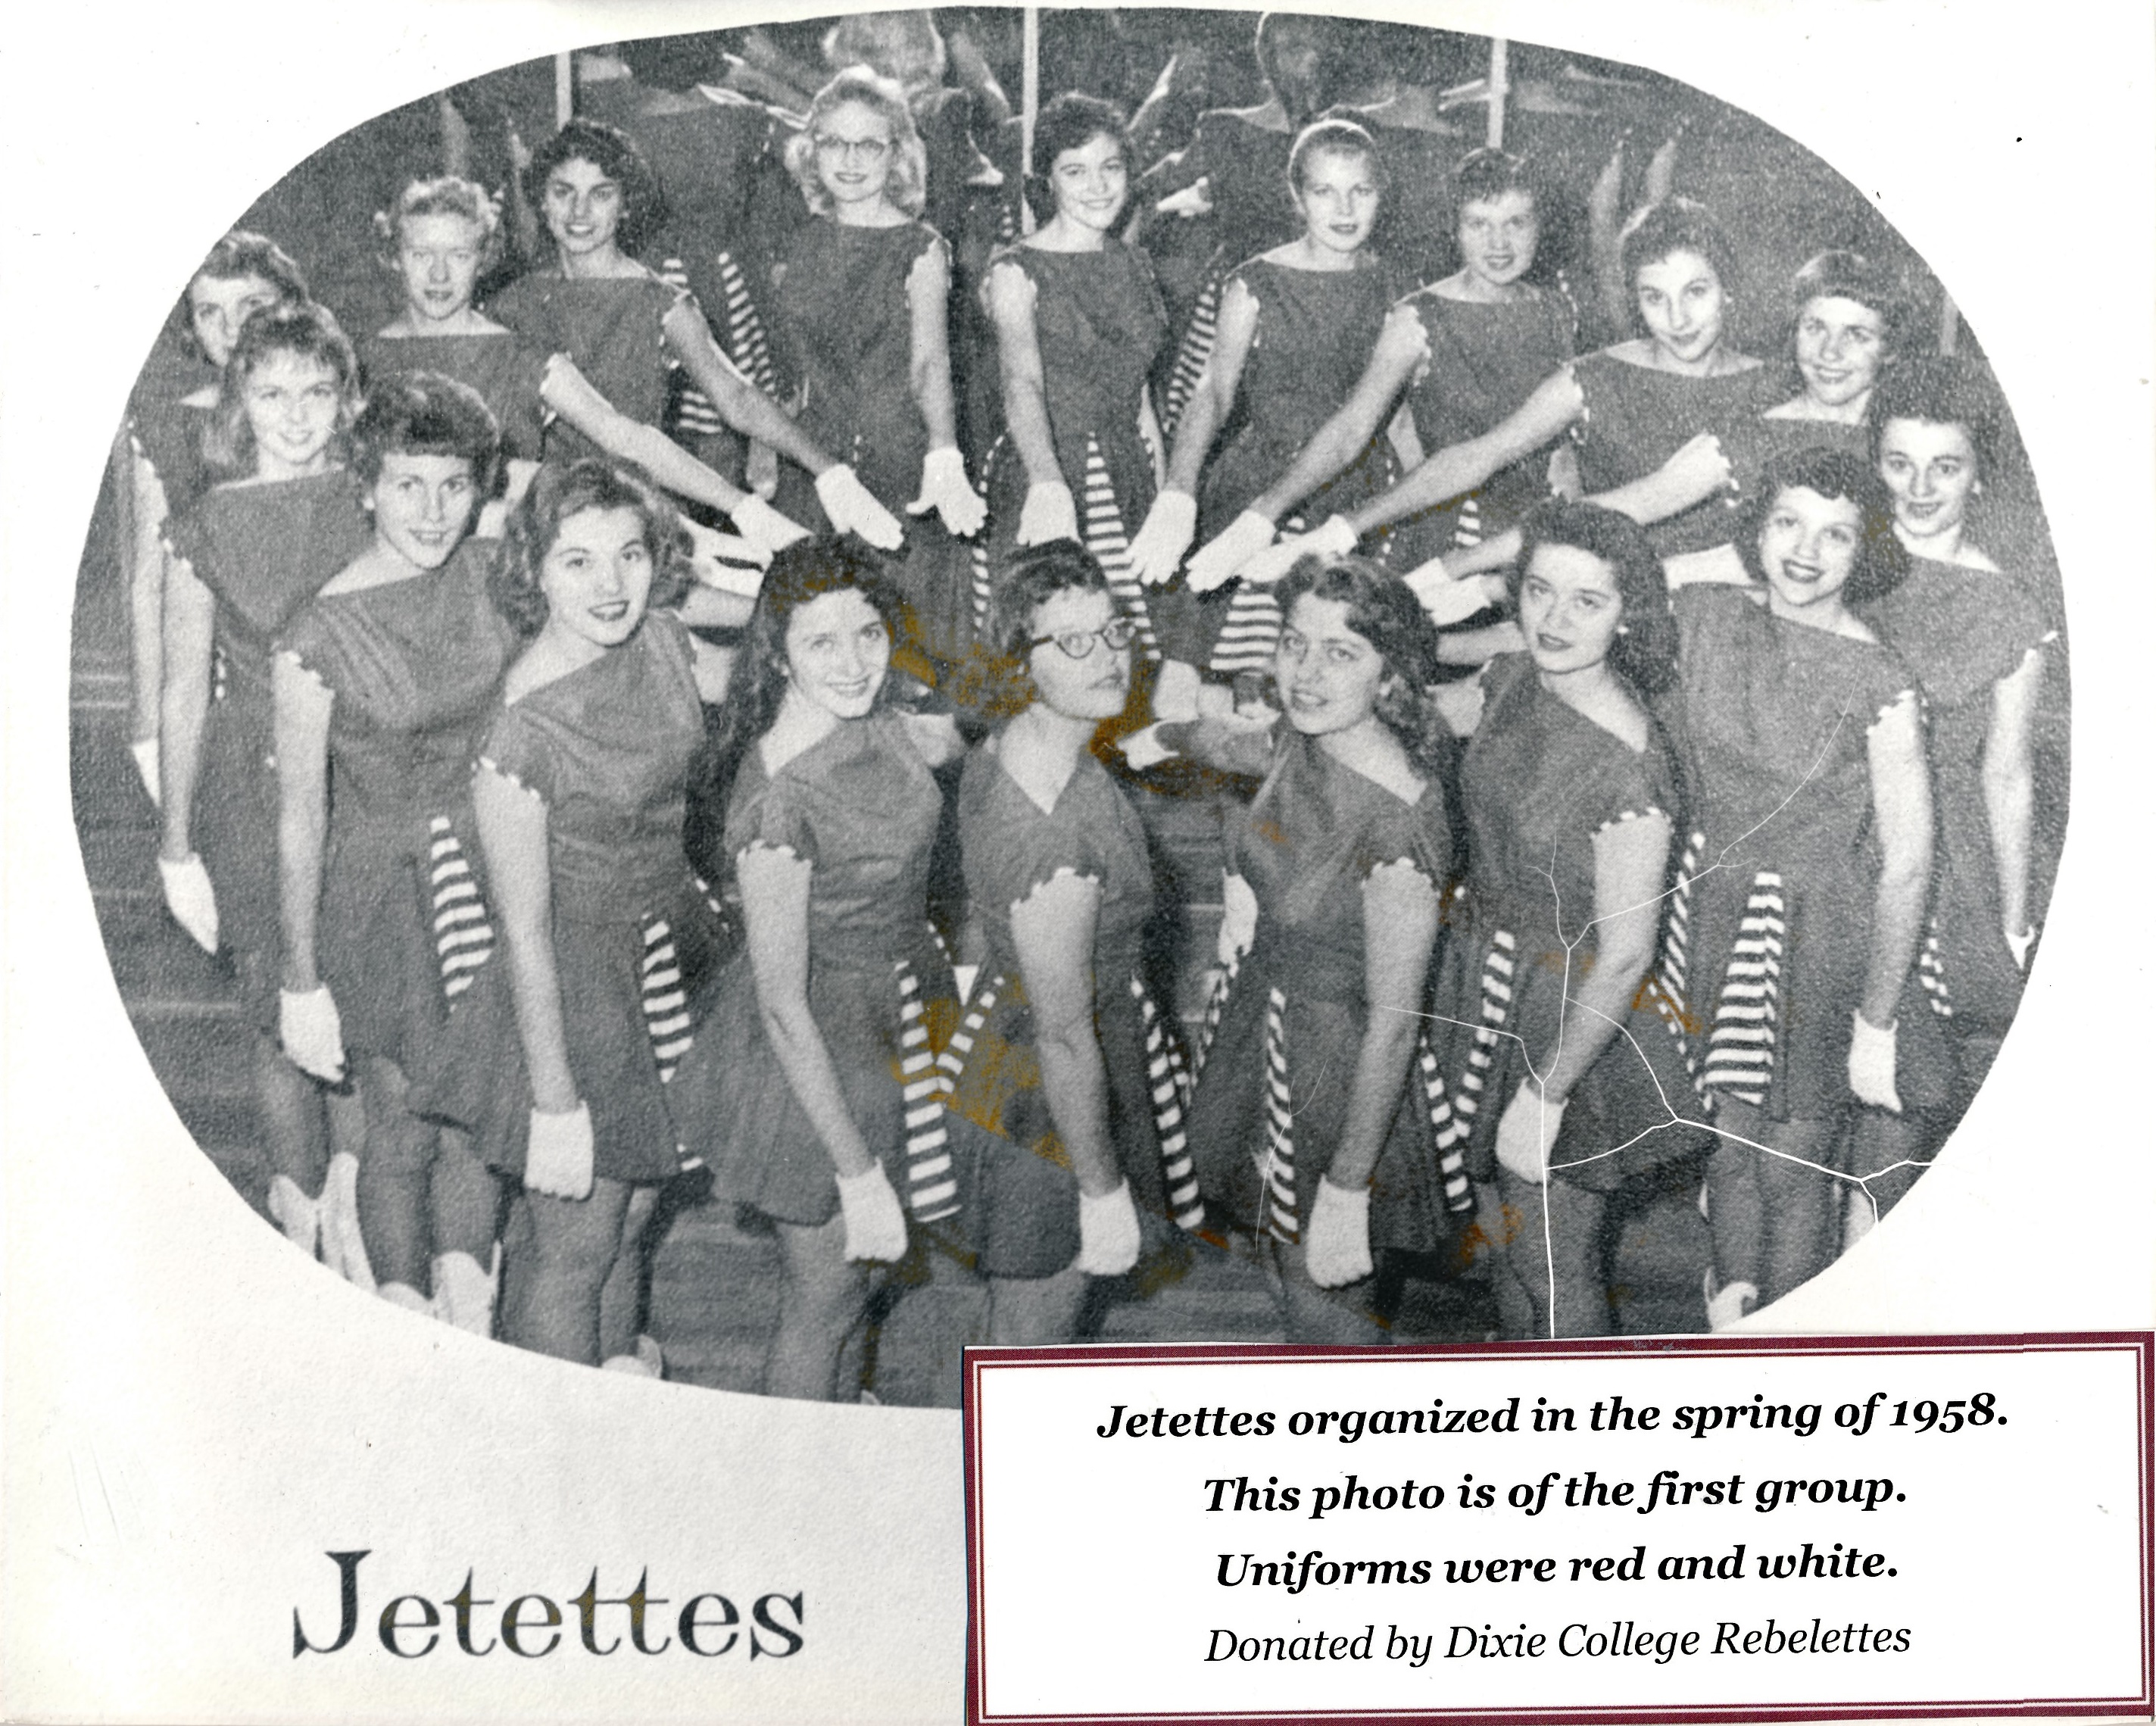 The first group of Dixie High School Jetettes organized in the spring of 1958